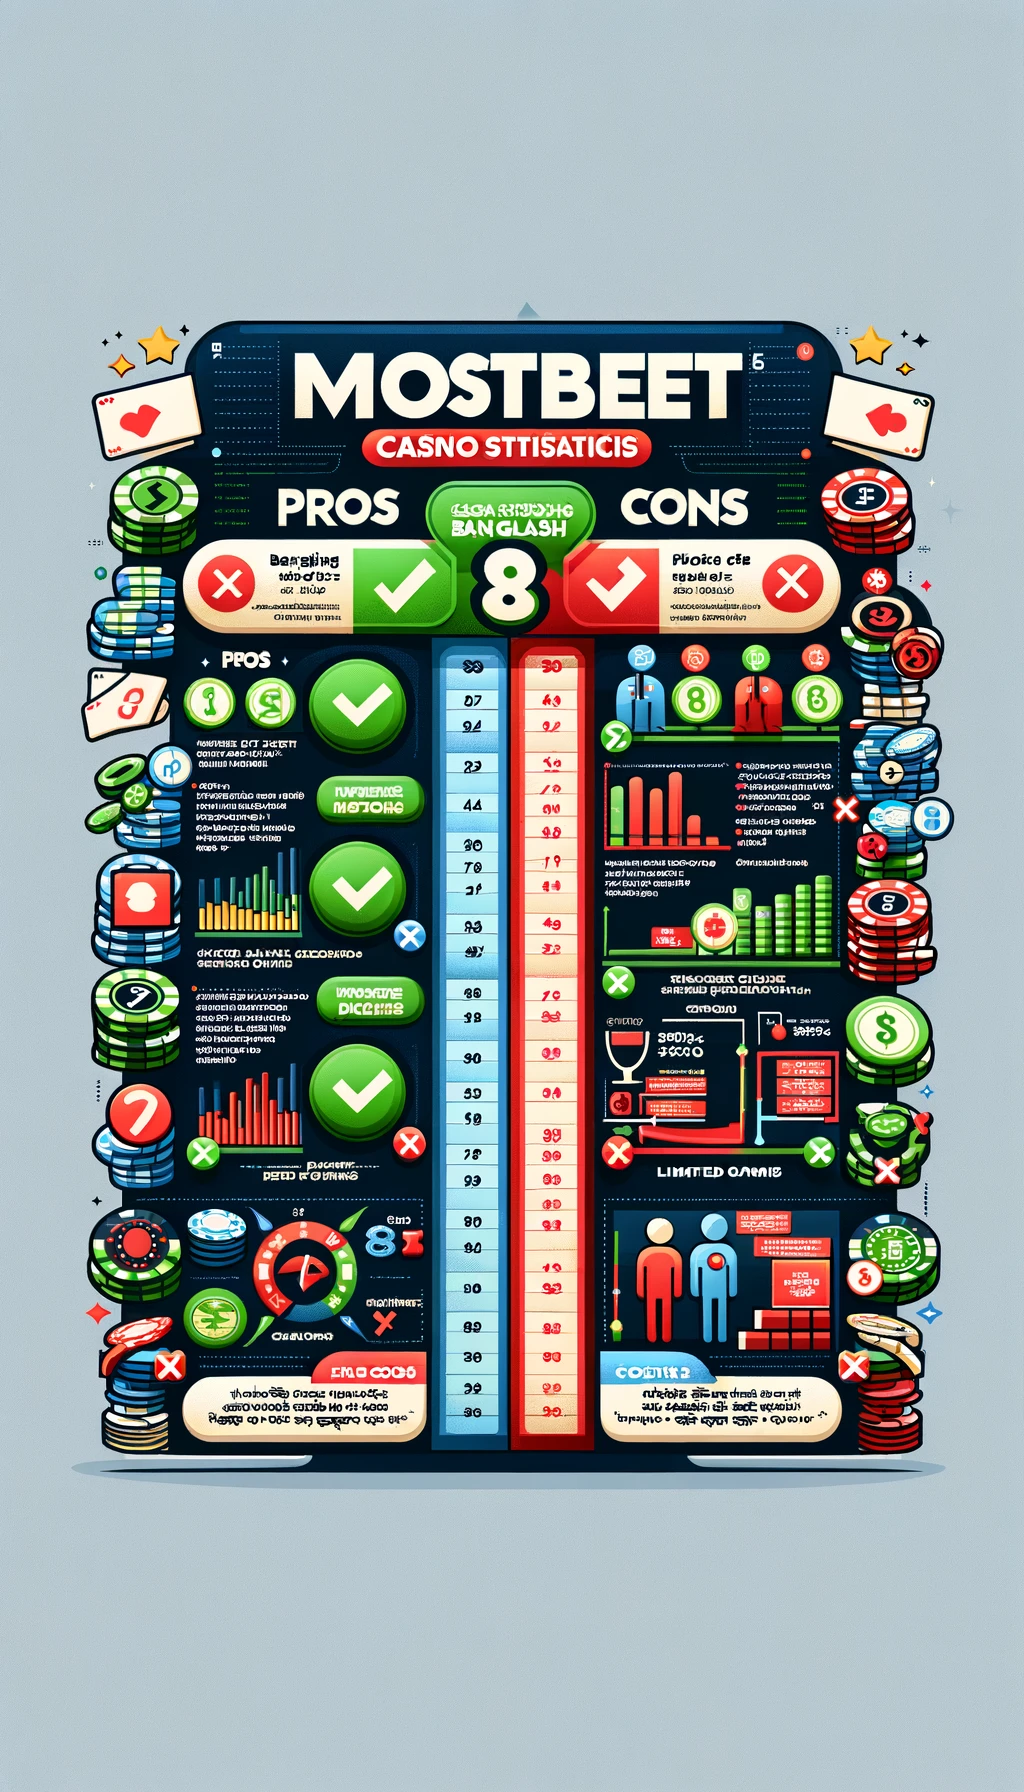 Pros and cons of Mostbet betting company